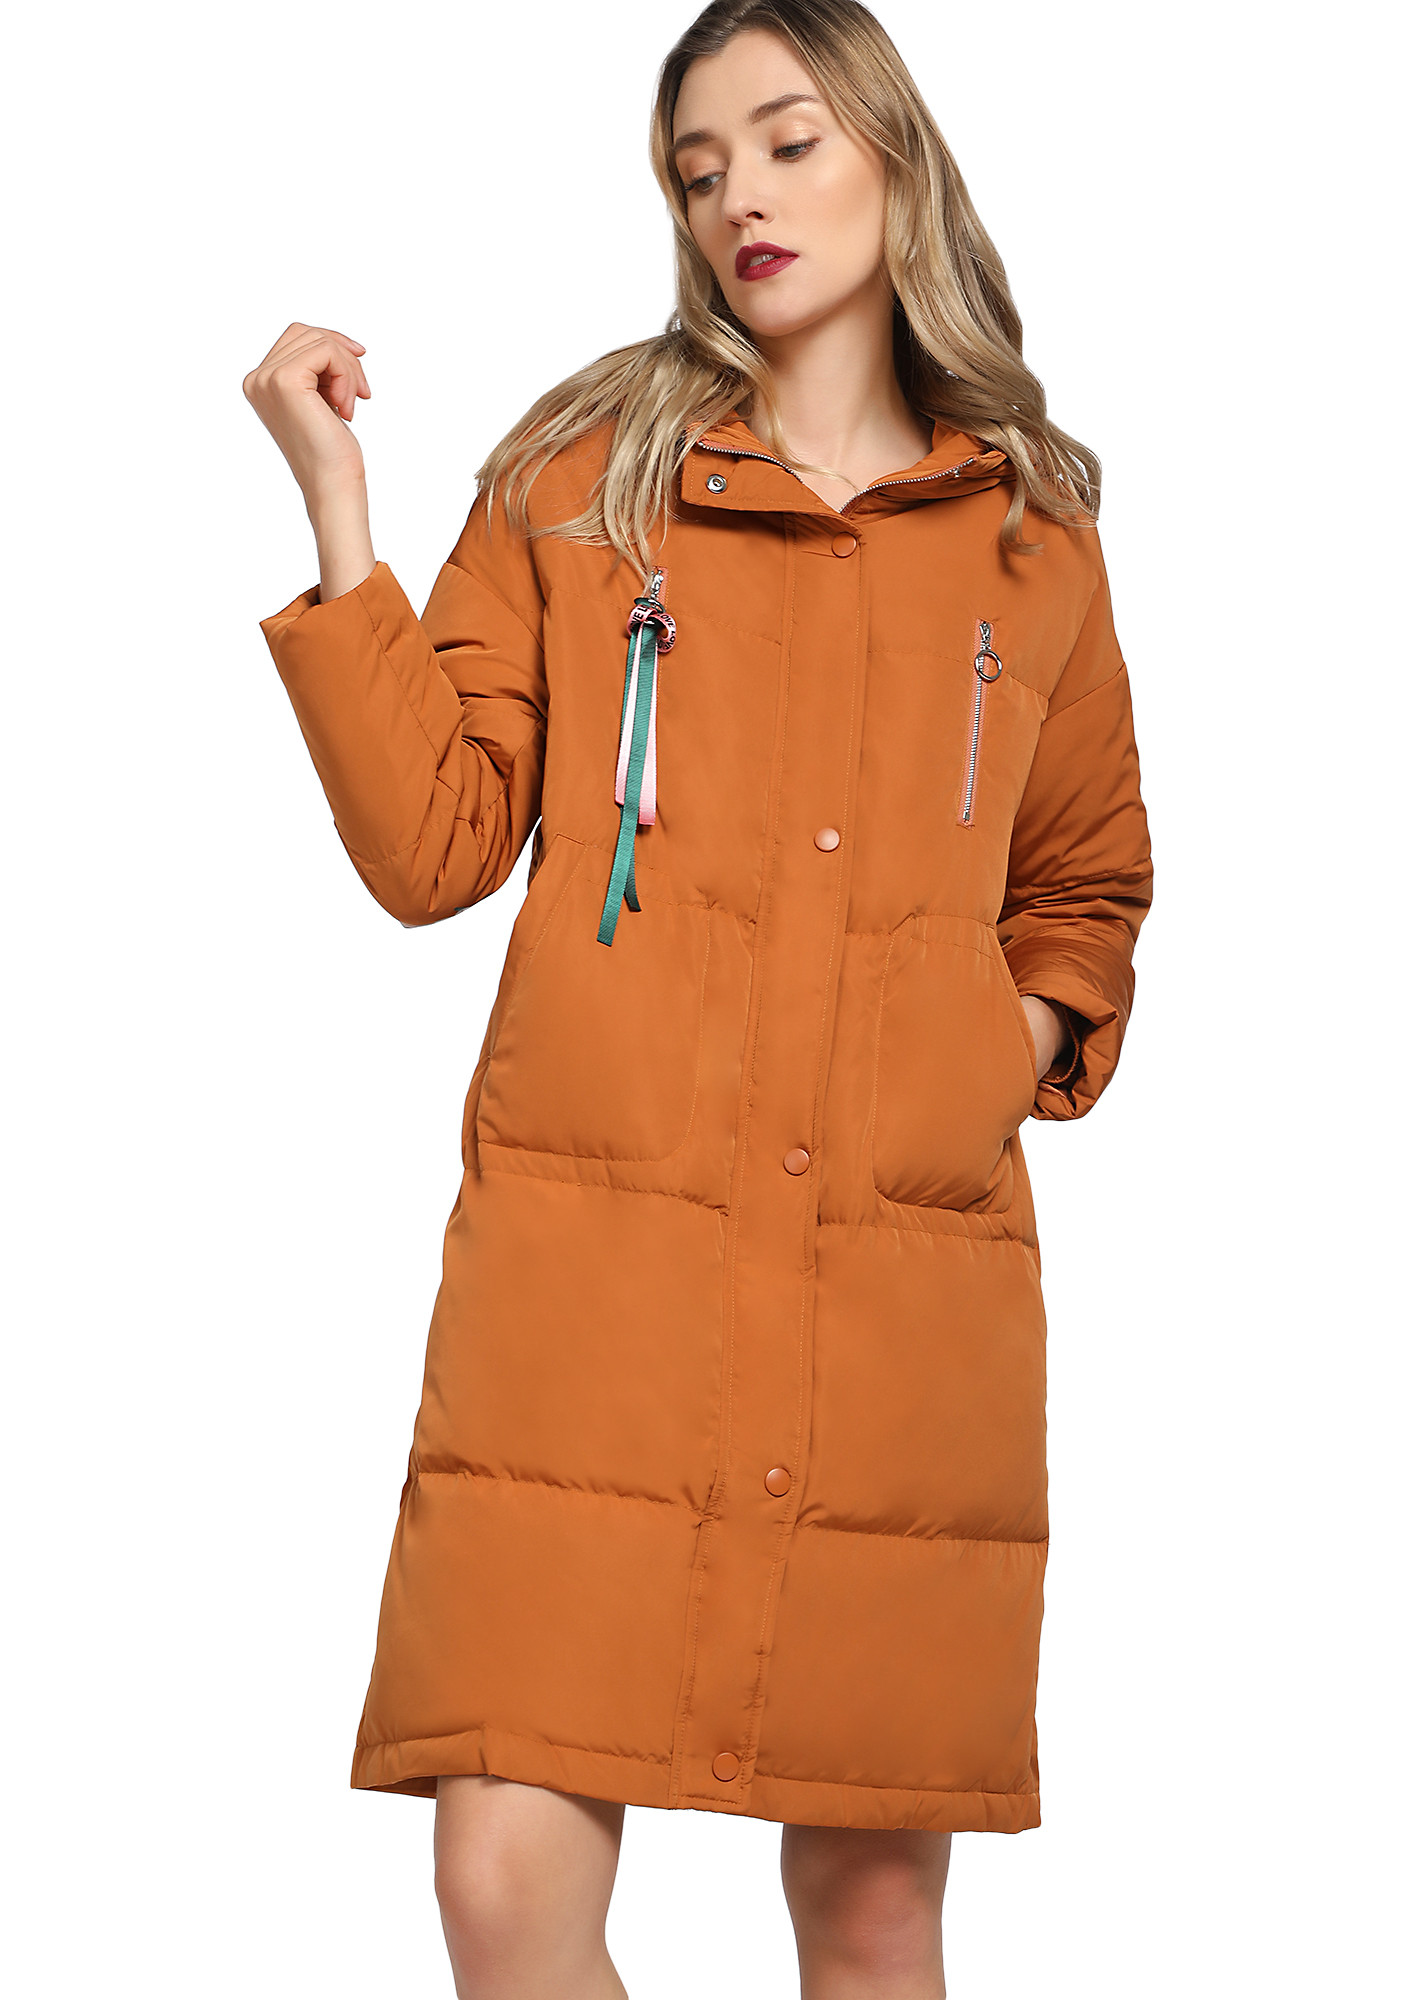 NEW IN CITY  TAN PUFFER JACKET